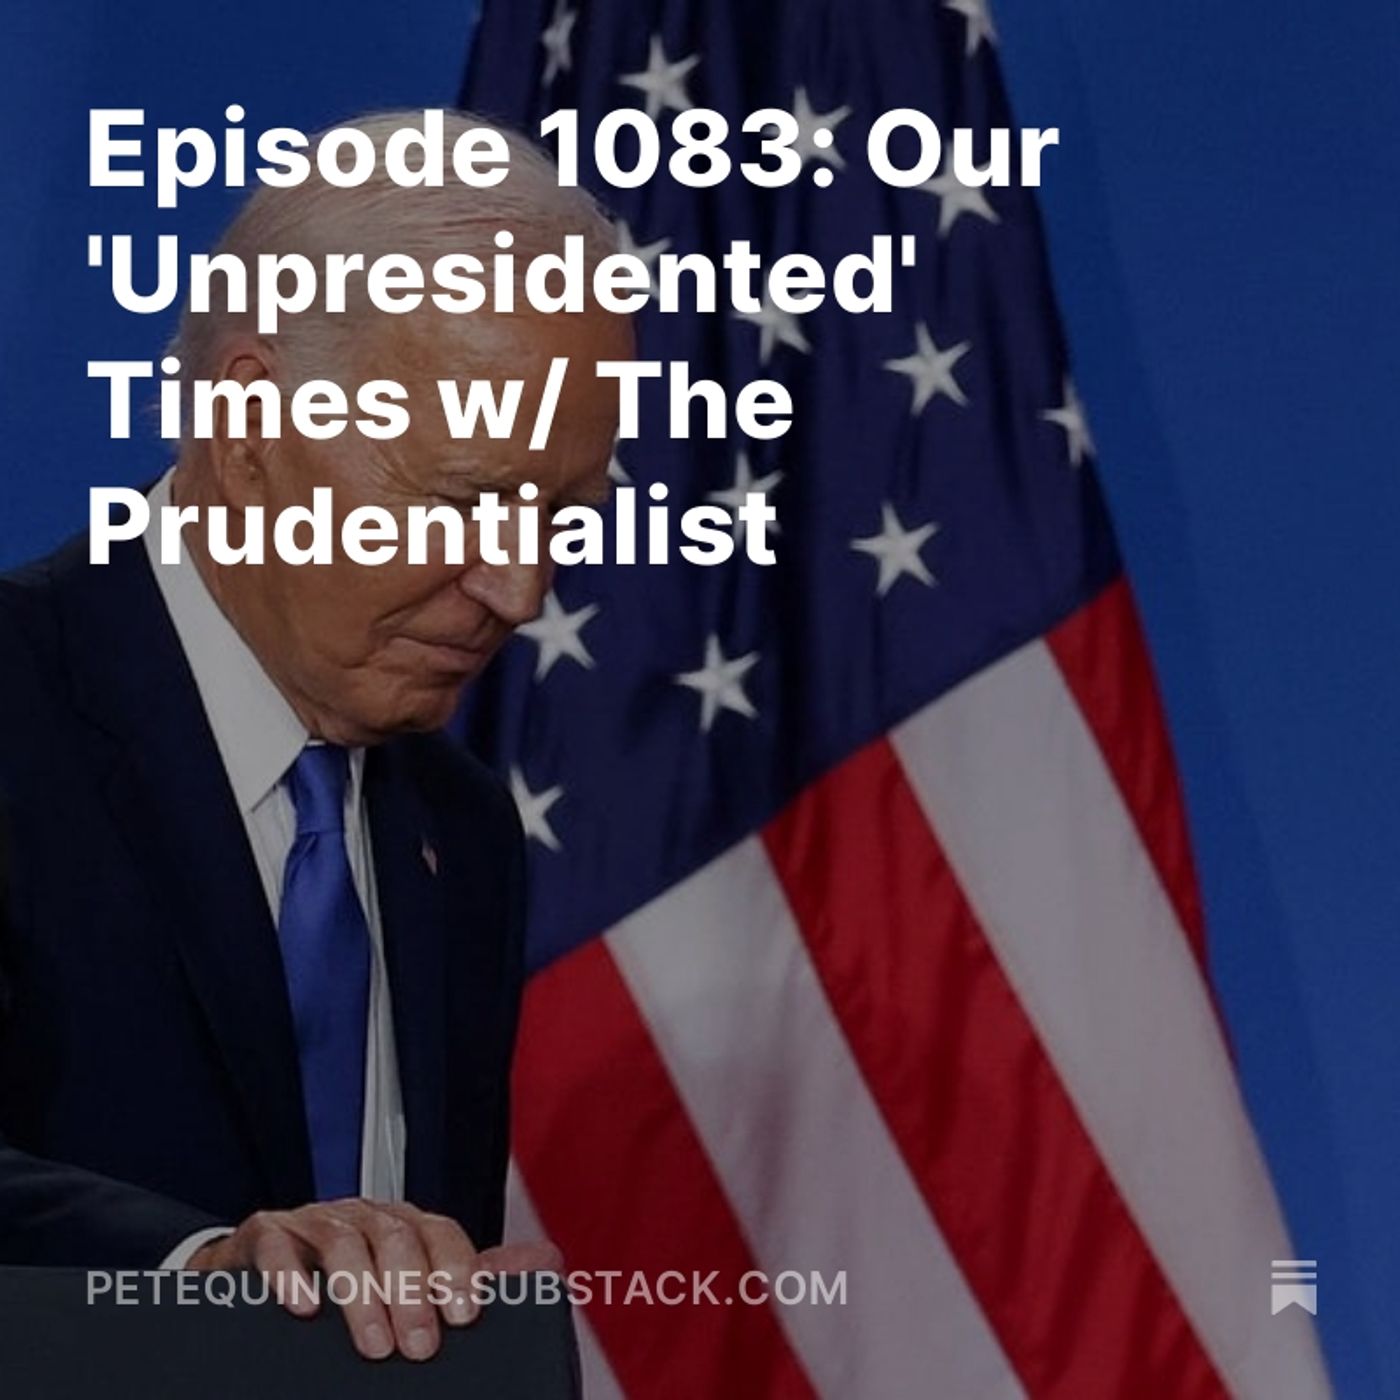 Episode 1083: Our 'Unpresidented' Times w/ The Prudentialist